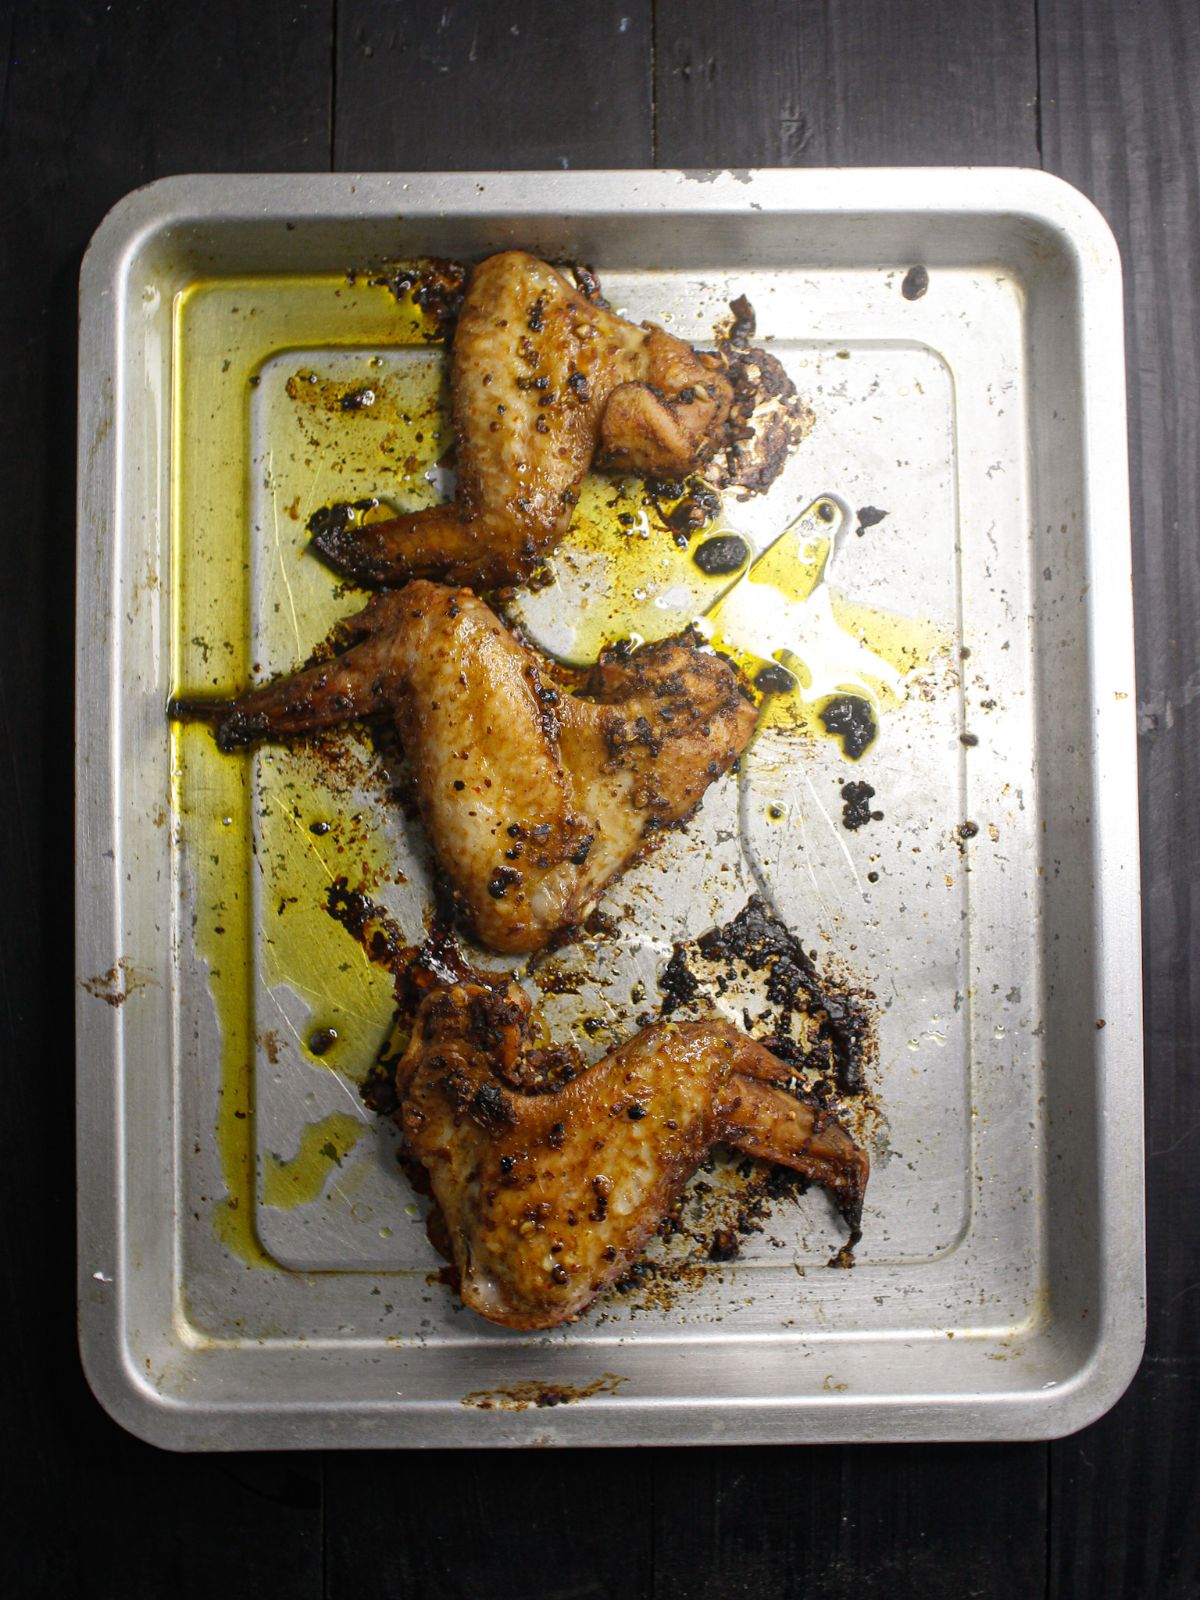 Baked chicken wings served with chopped basil